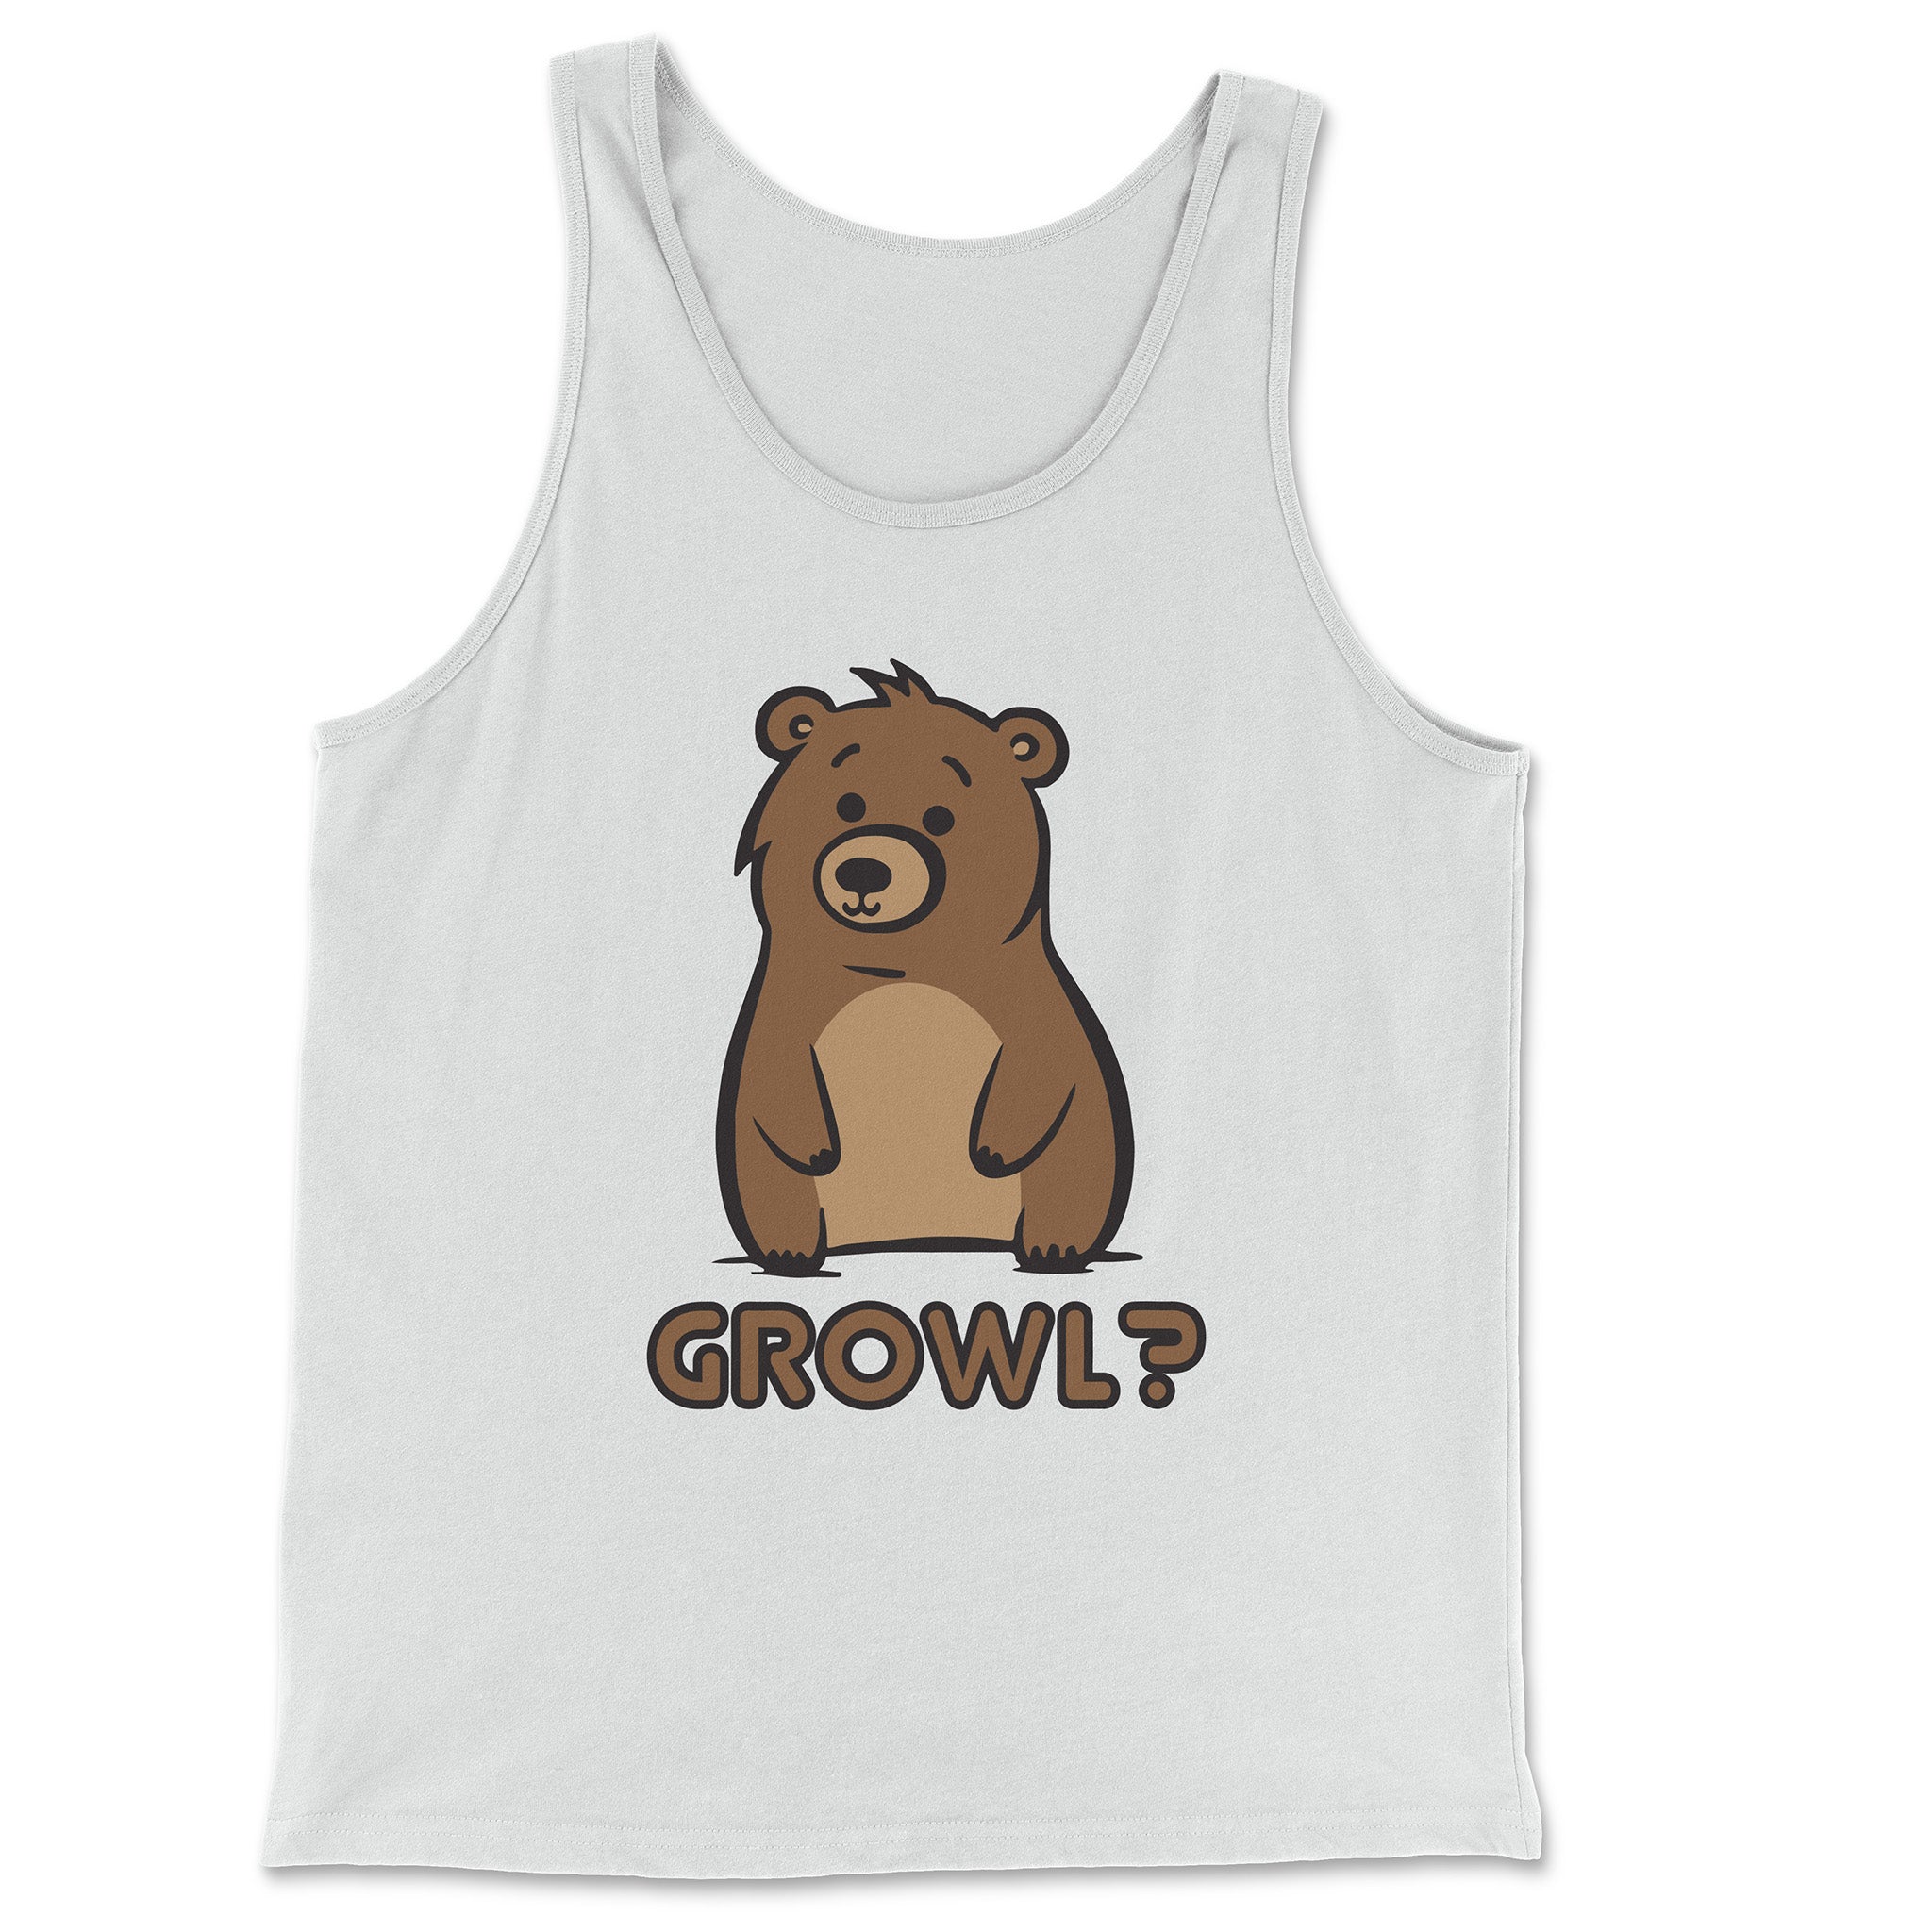 "Growl Bear" Expressive Tank Top - Hunky Tops#color_white